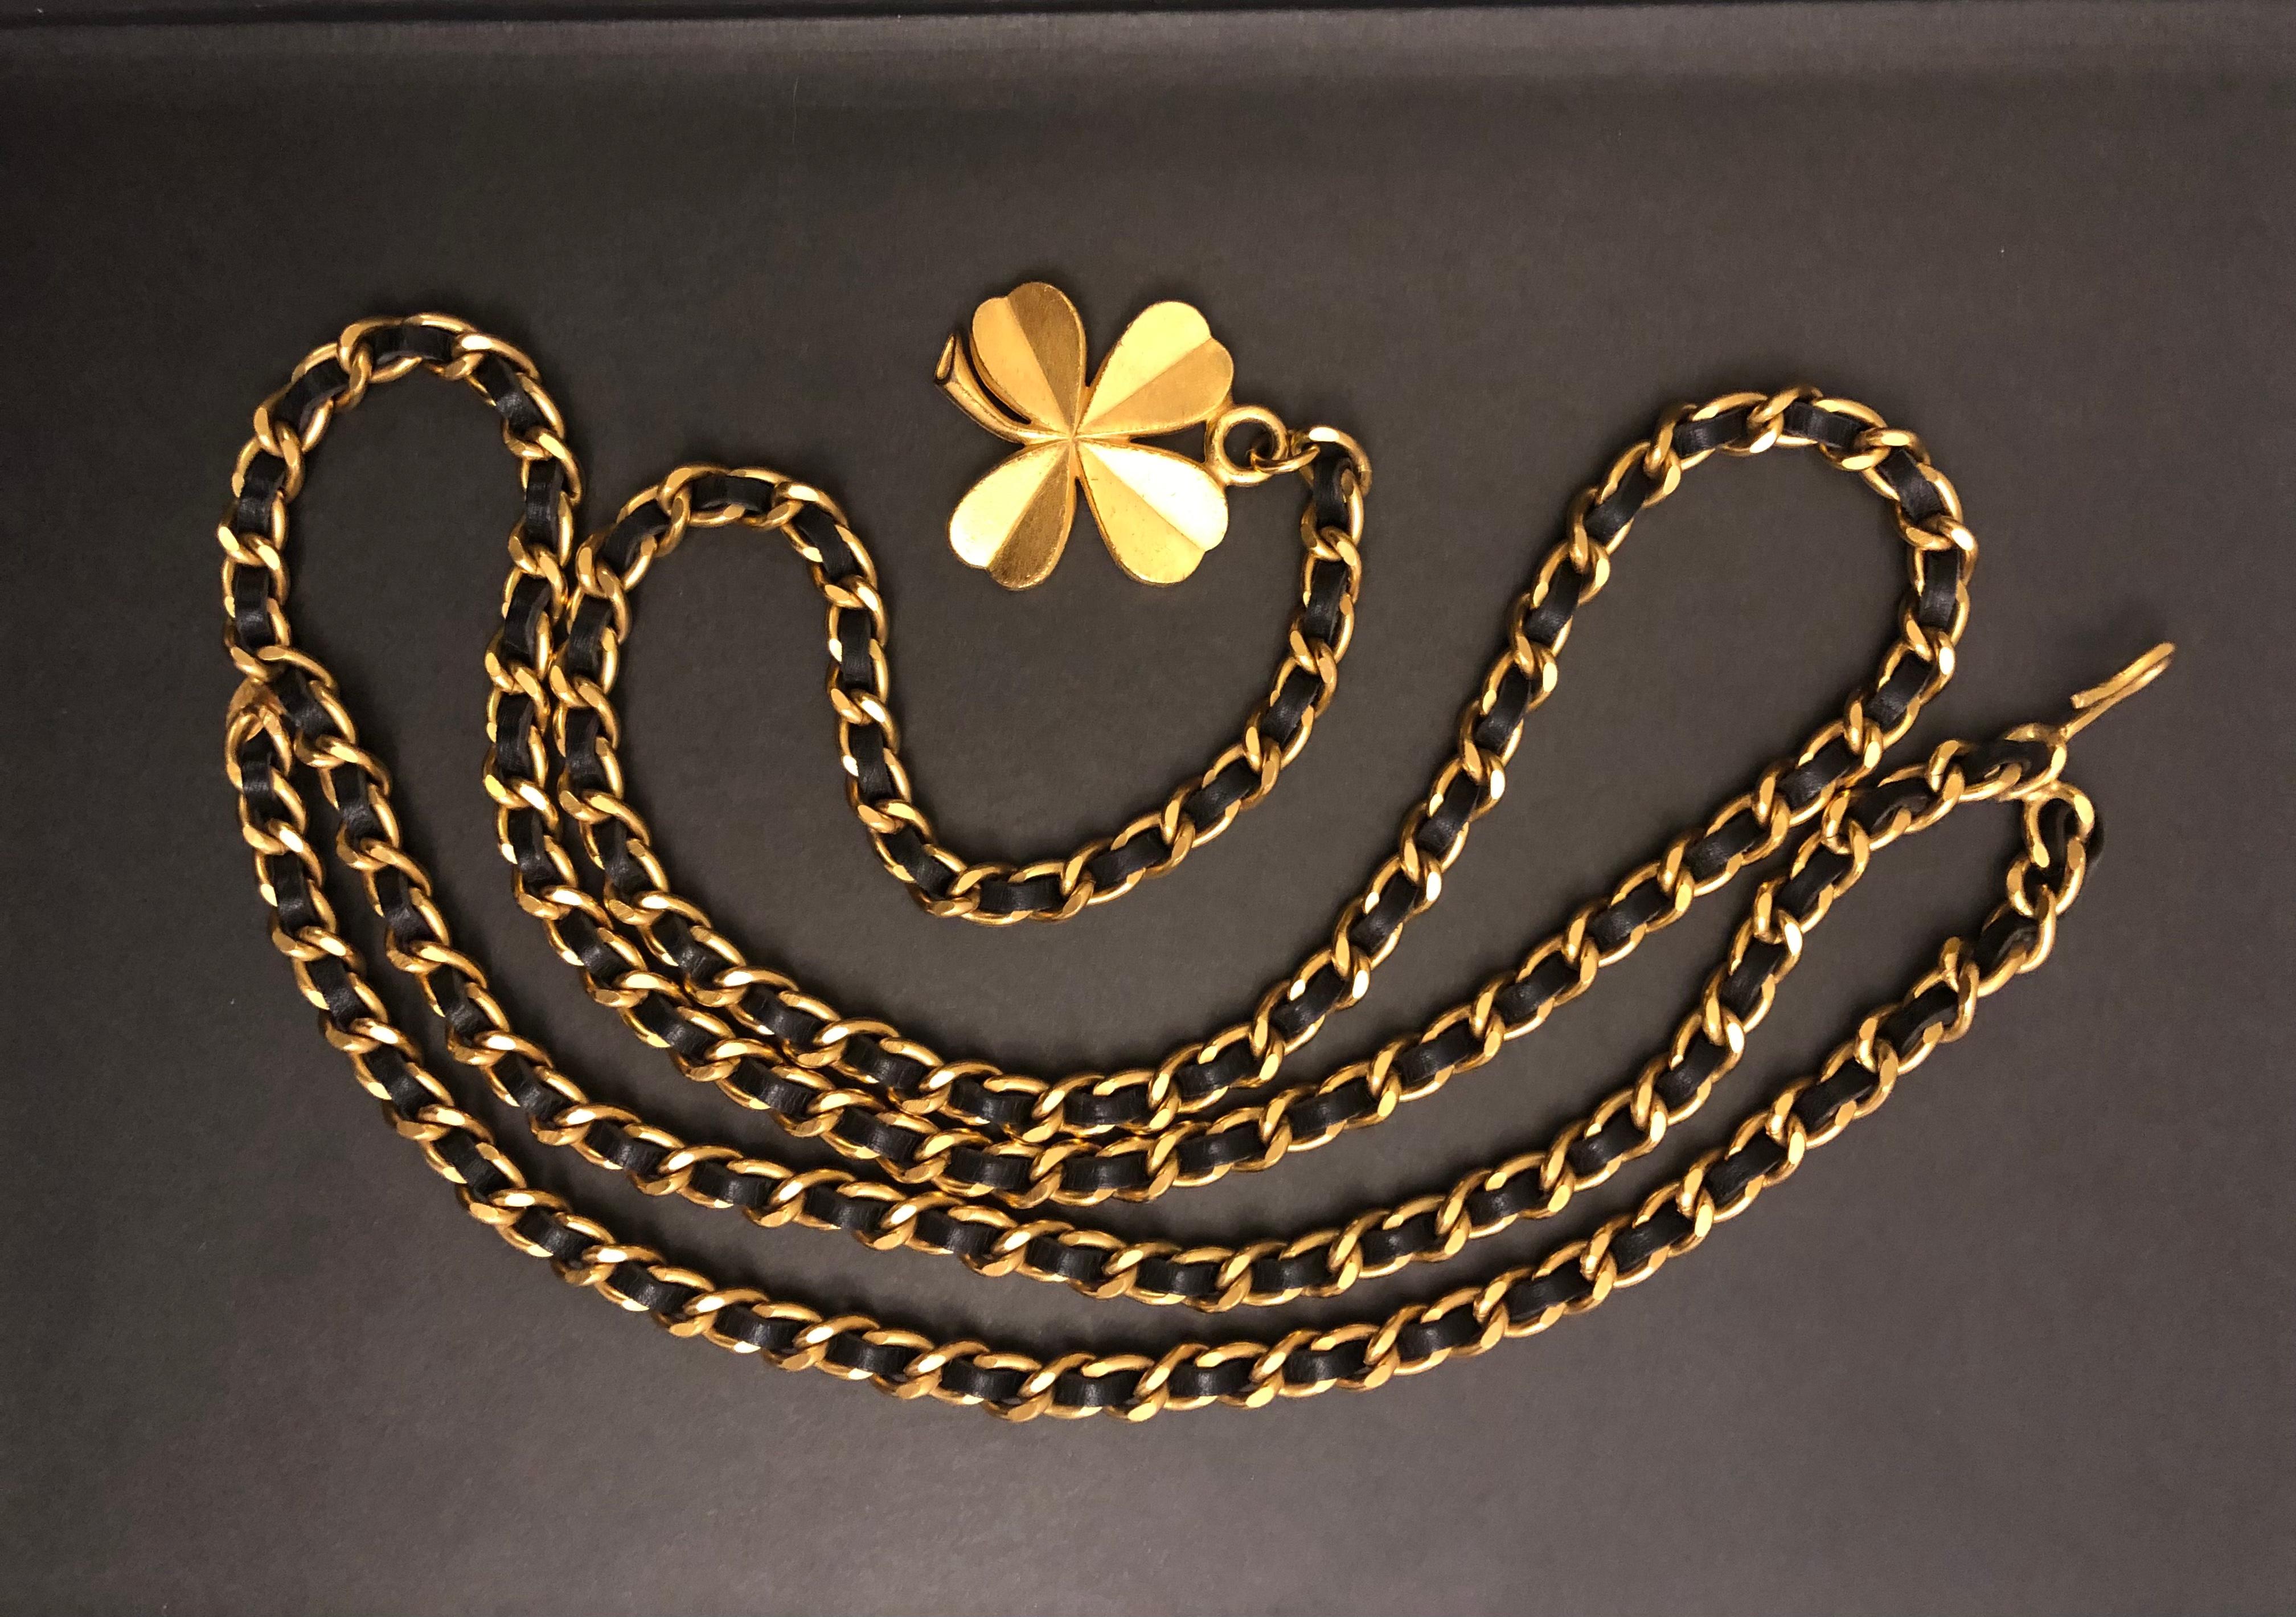 CHANEL Clover motif Necklace Necklace Gold Plated Rhinestone Gold Women